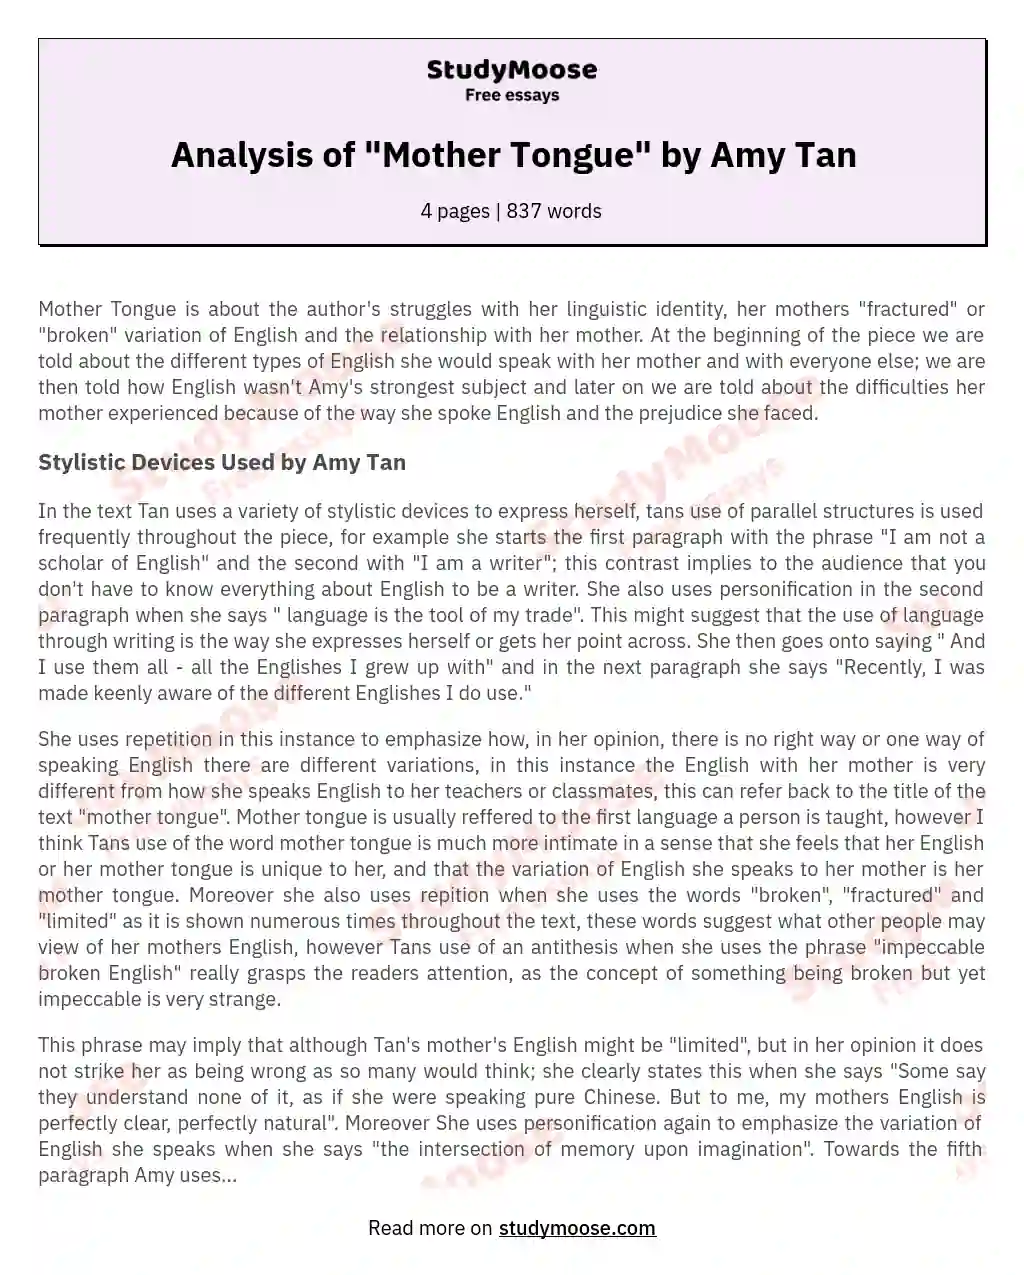 Analysis of "Mother Tongue" by Amy Tan